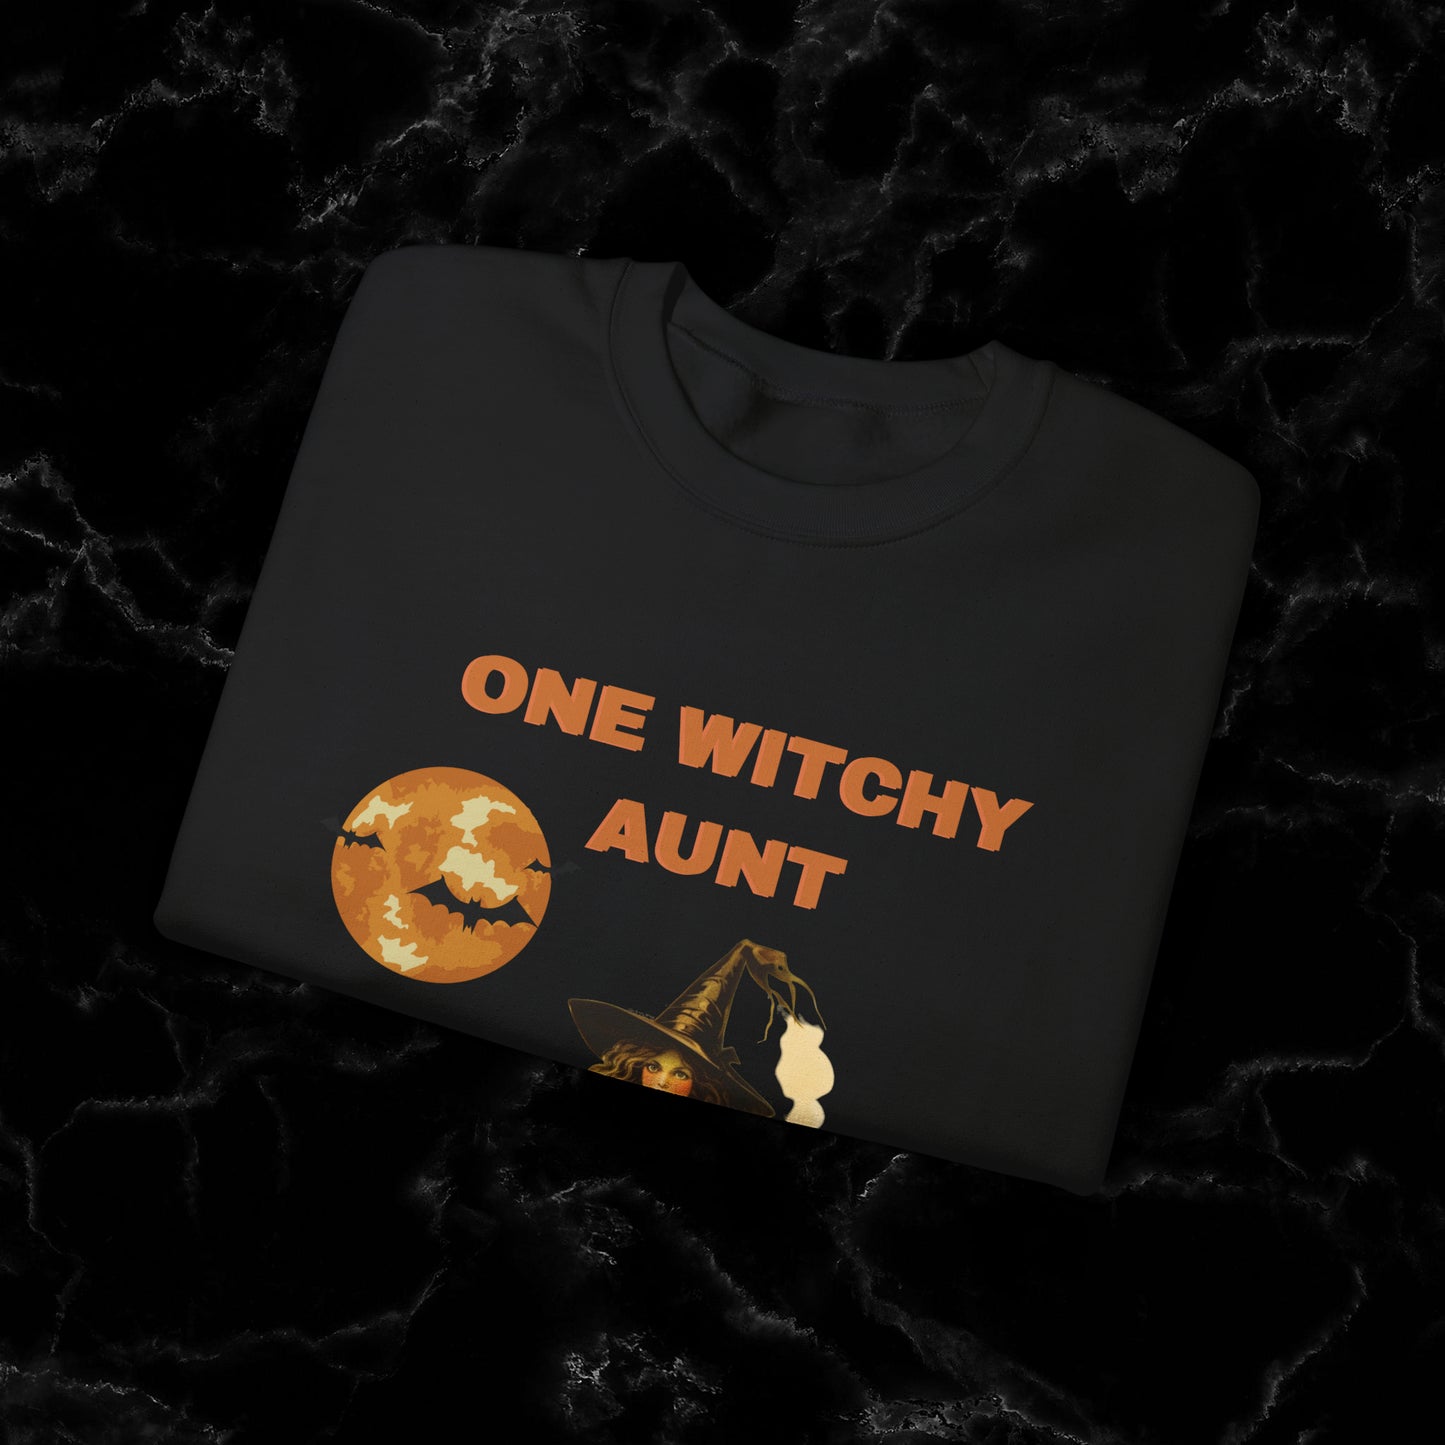 One Witchy Aunt Sweatshirt - Cool Aunt Shirt, Feral Aunt Sweatshirt, Perfect Gifts for Aunts Halloween Sweatshirt   